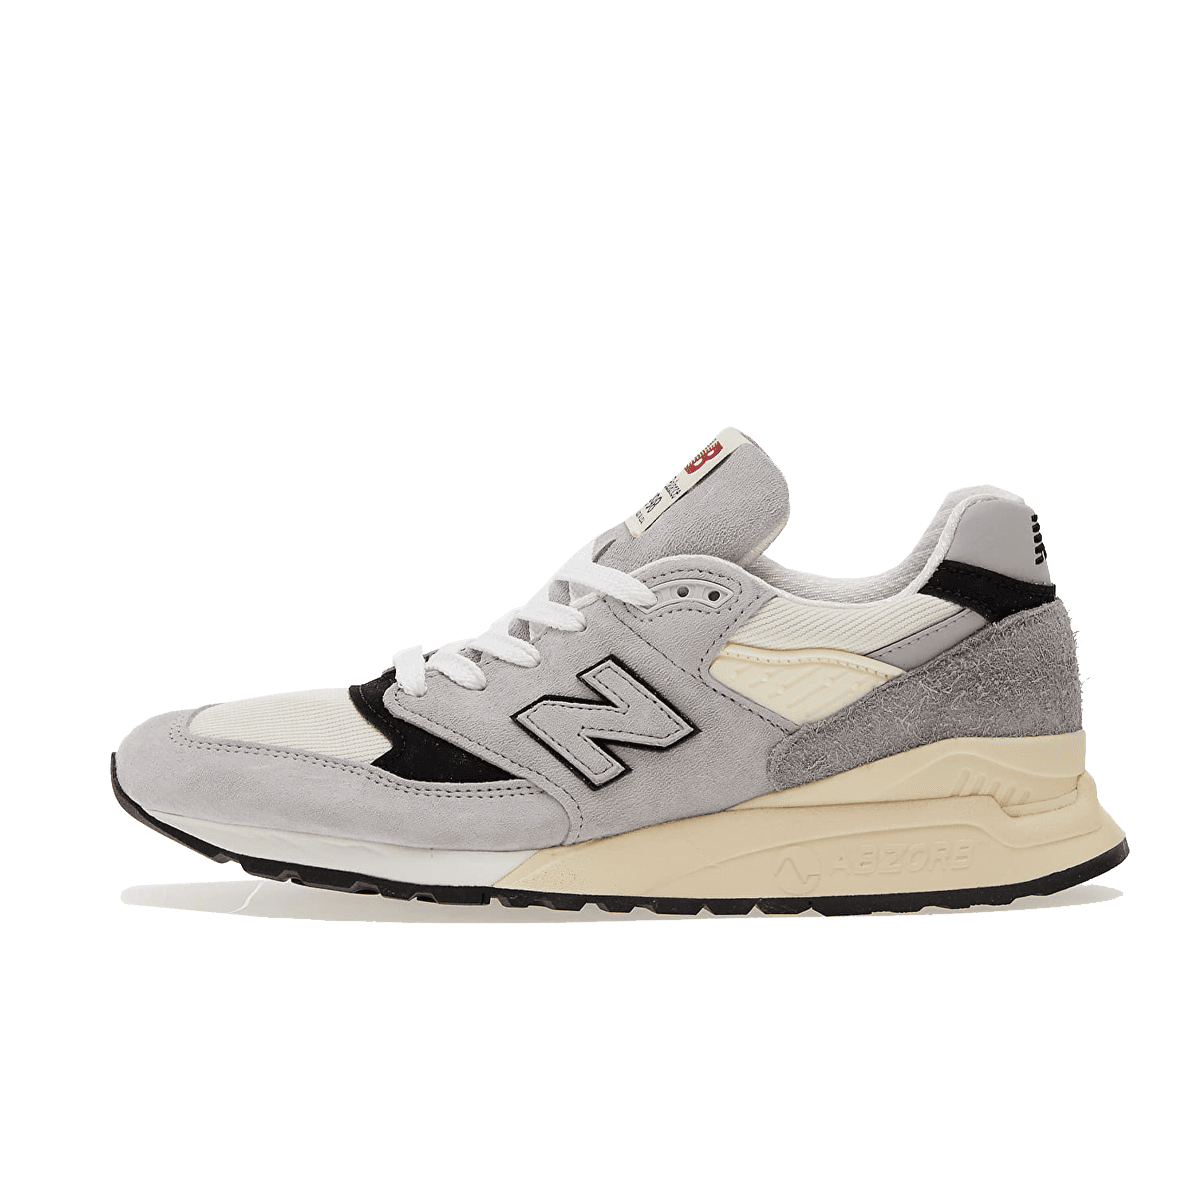 Concepts x New Balance 998 - Made in USA | U998CN | The Drop Date